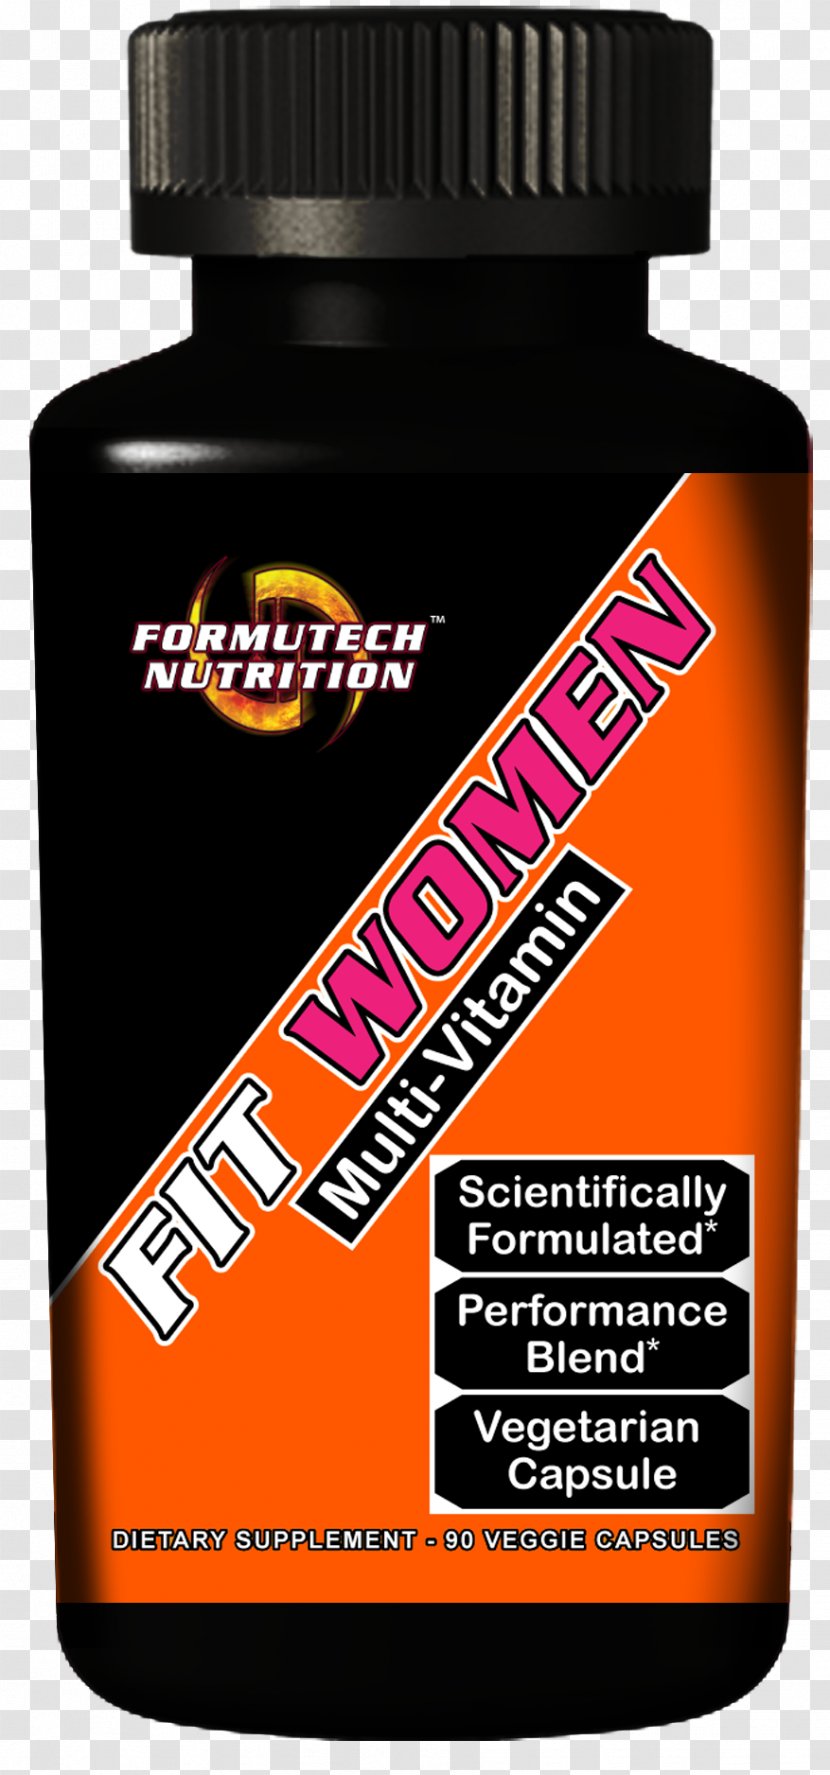 Dietary Supplement Levocarnitine Tablet Capsule Nutrition - Bodybuilding Woman Transparent PNG